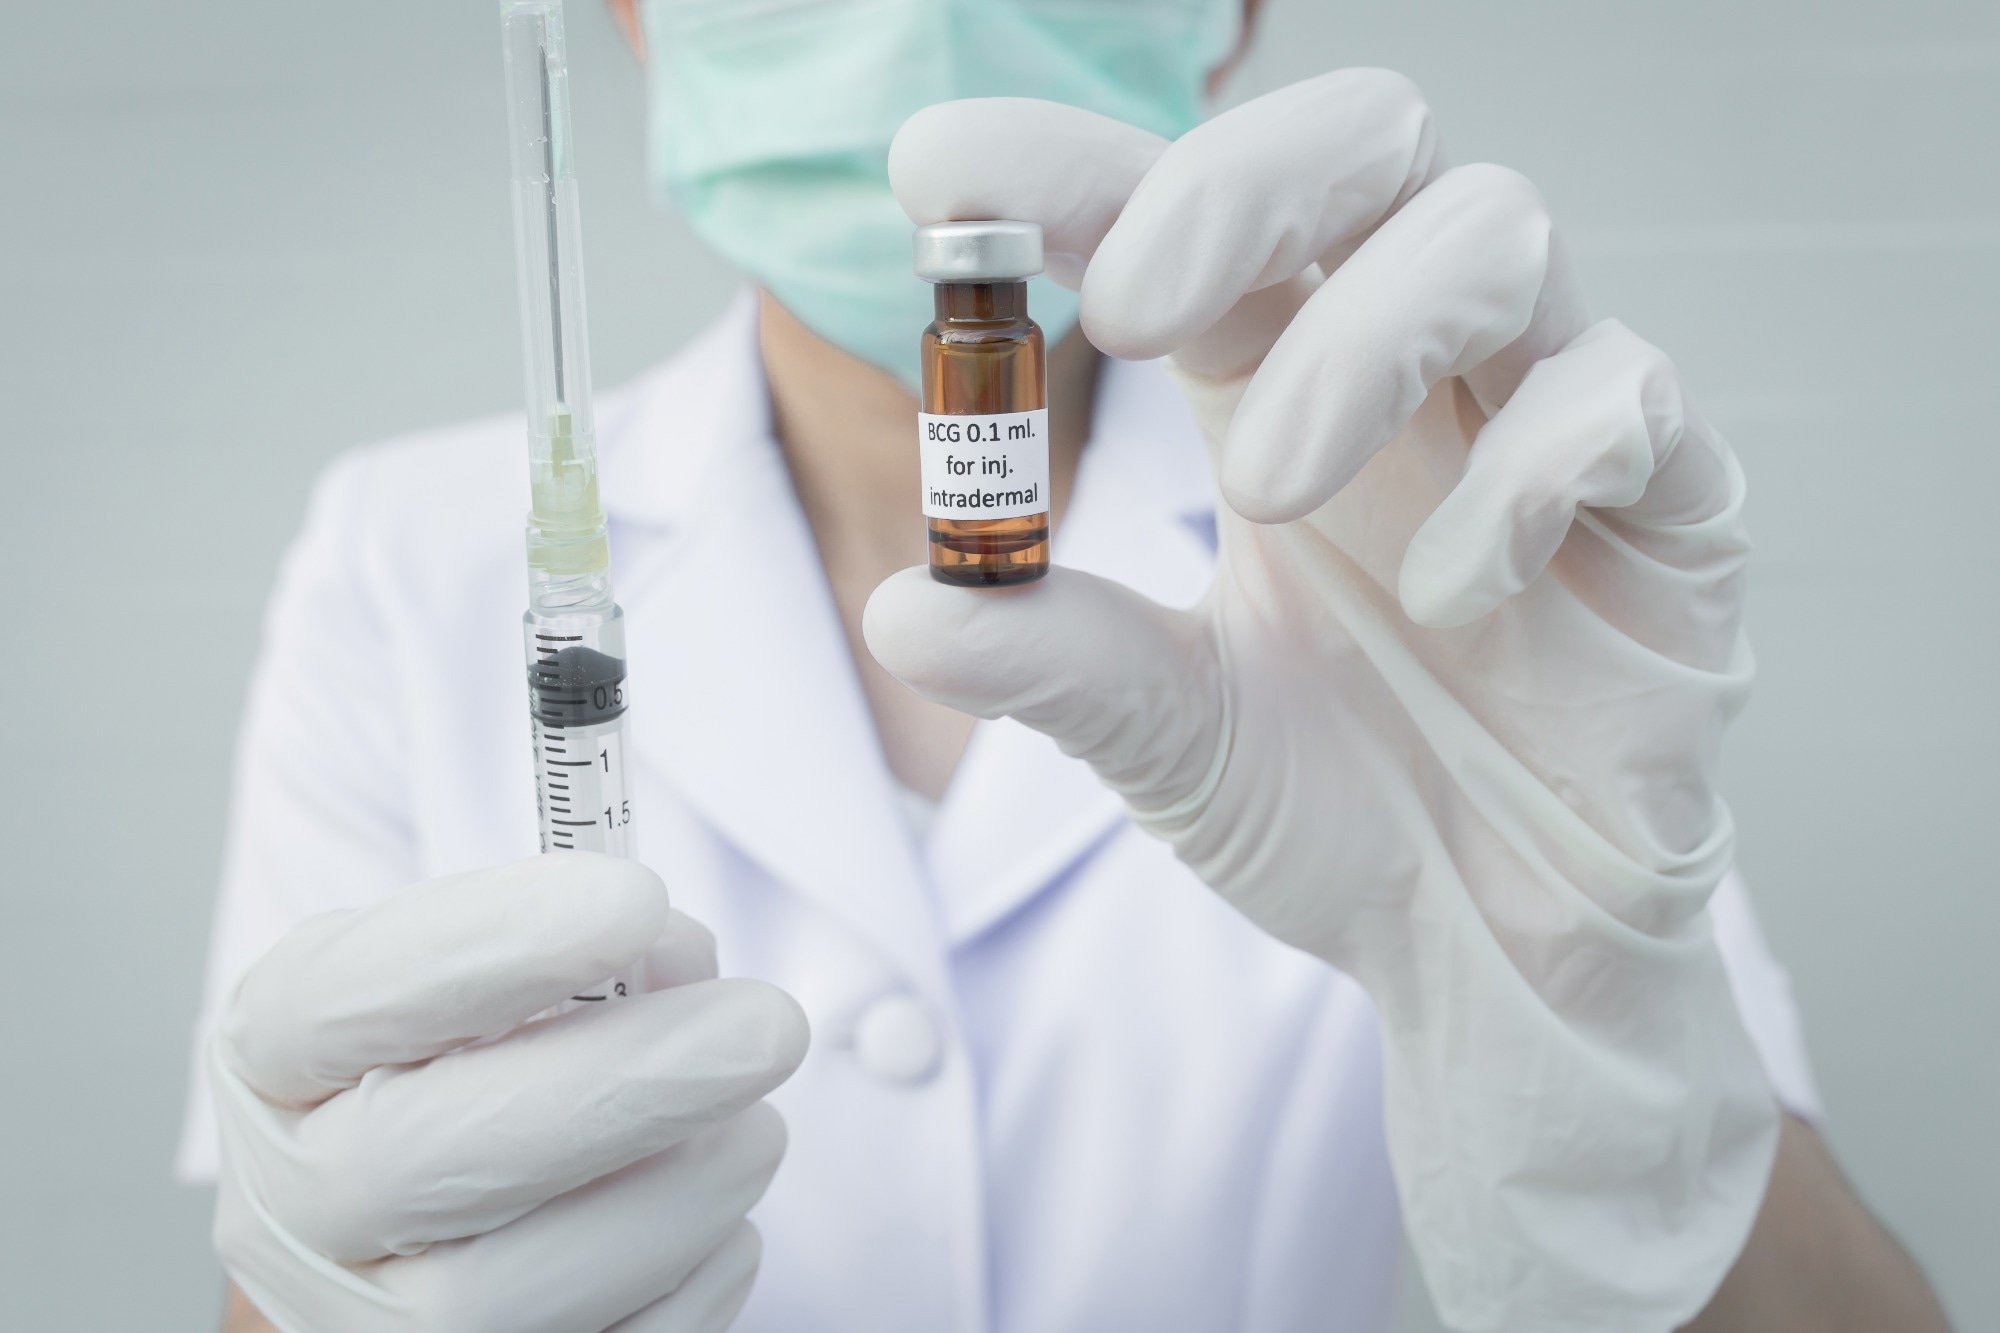 Study: Randomized Trial of BCG Vaccine to Protect against Covid-19 in Health Care Workers. Image Credit: ChompooSuriyo/Shutterstock.com